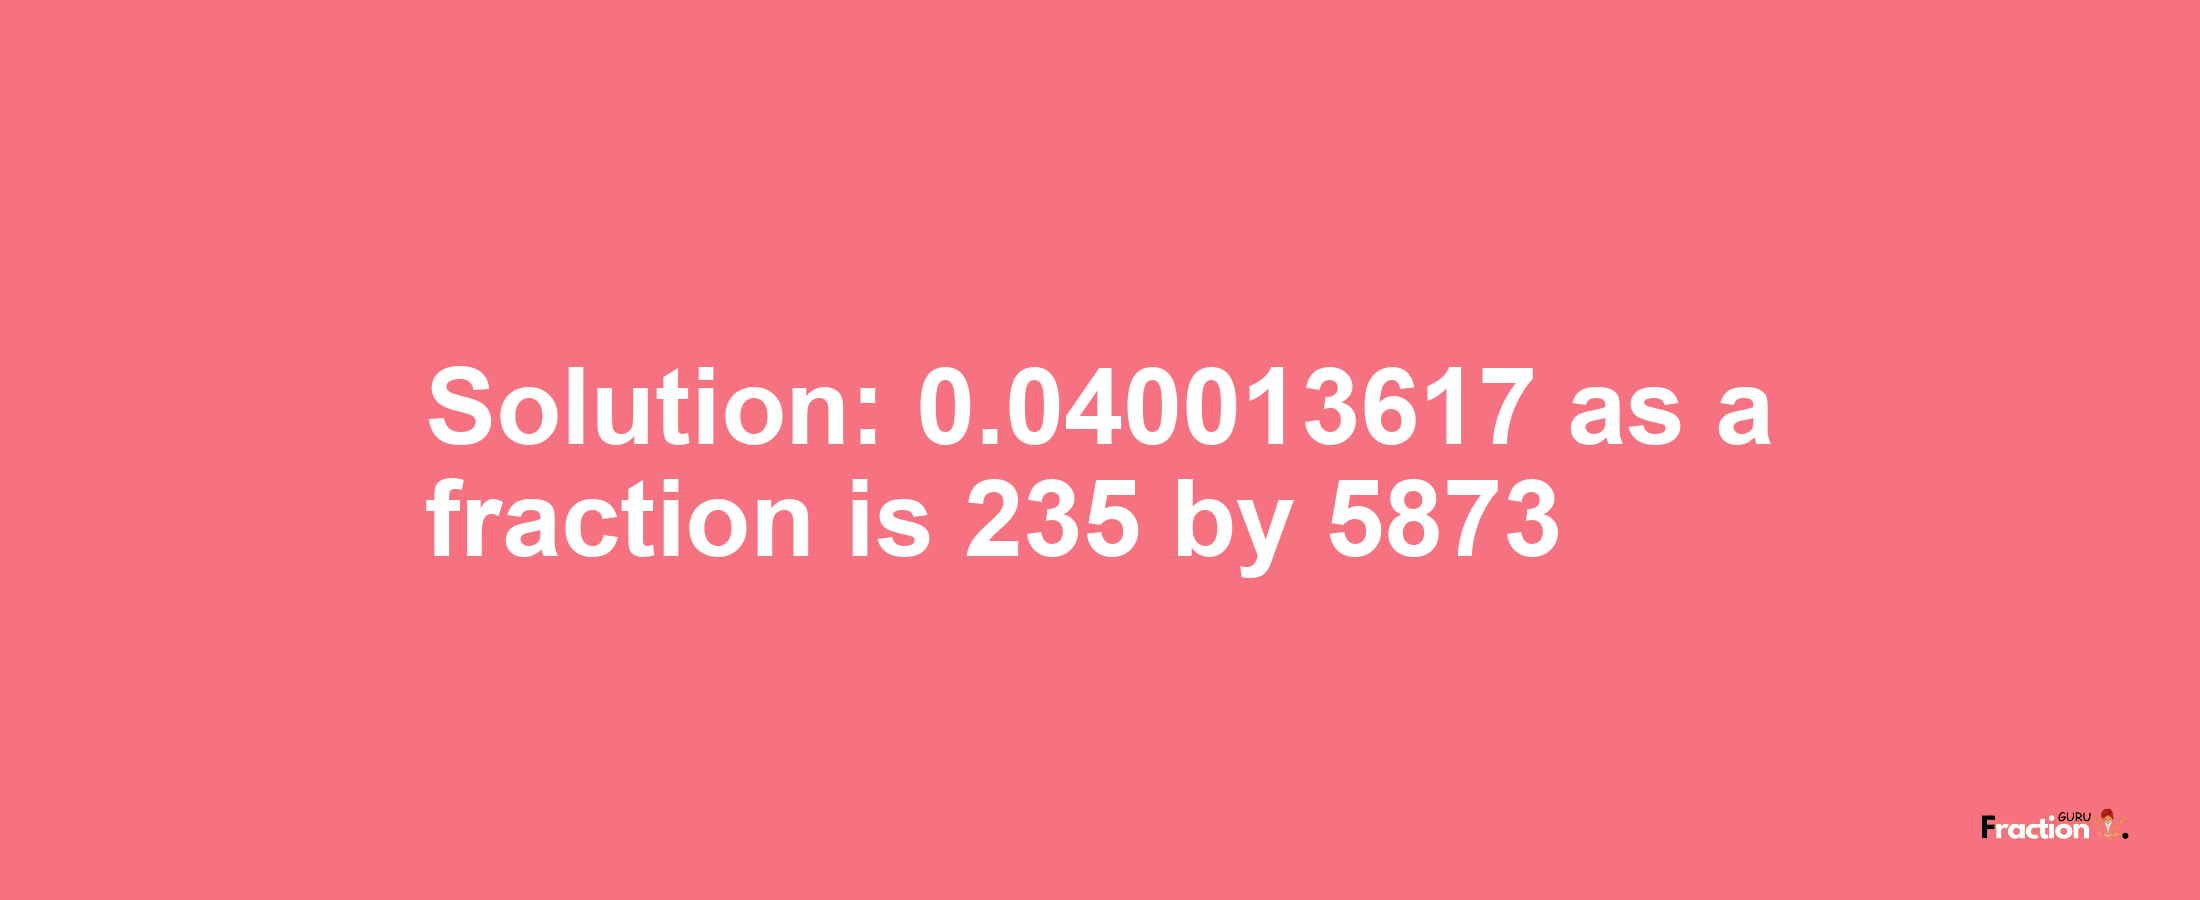 Solution:0.040013617 as a fraction is 235/5873